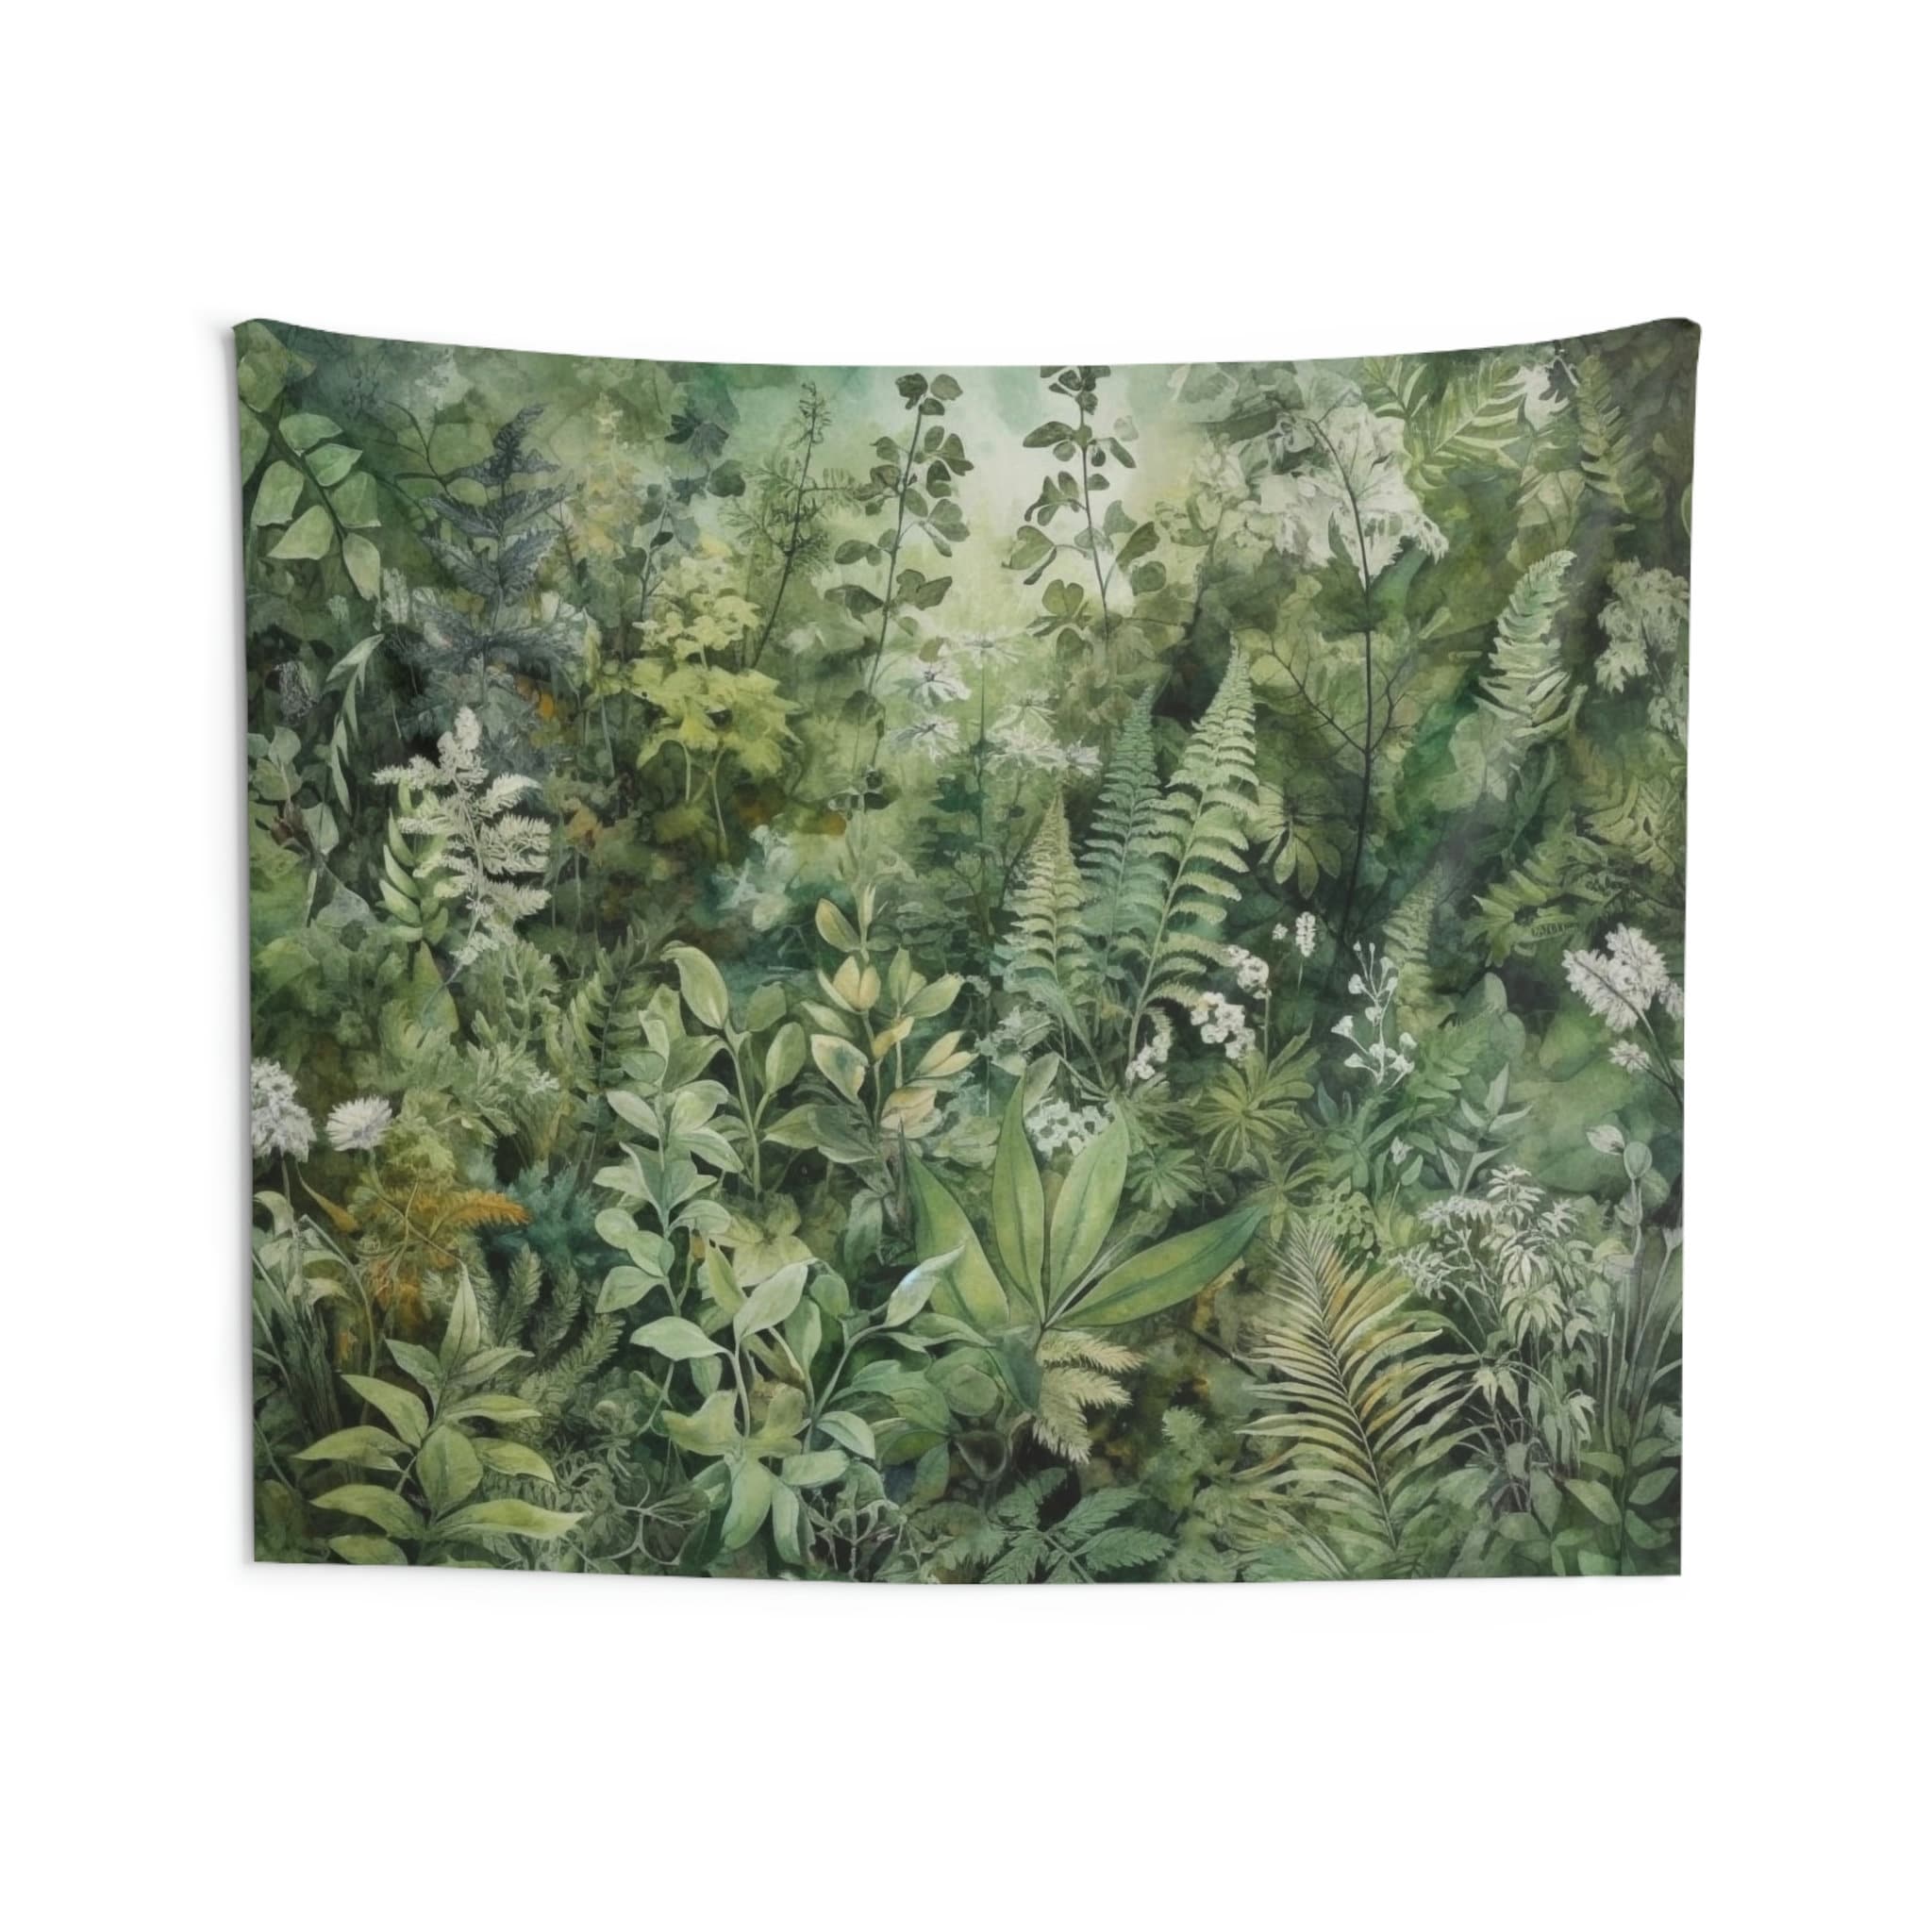 Artificial Ivy, Wall Hanging Ivy, Room Decor, Fancy Dress, Poison